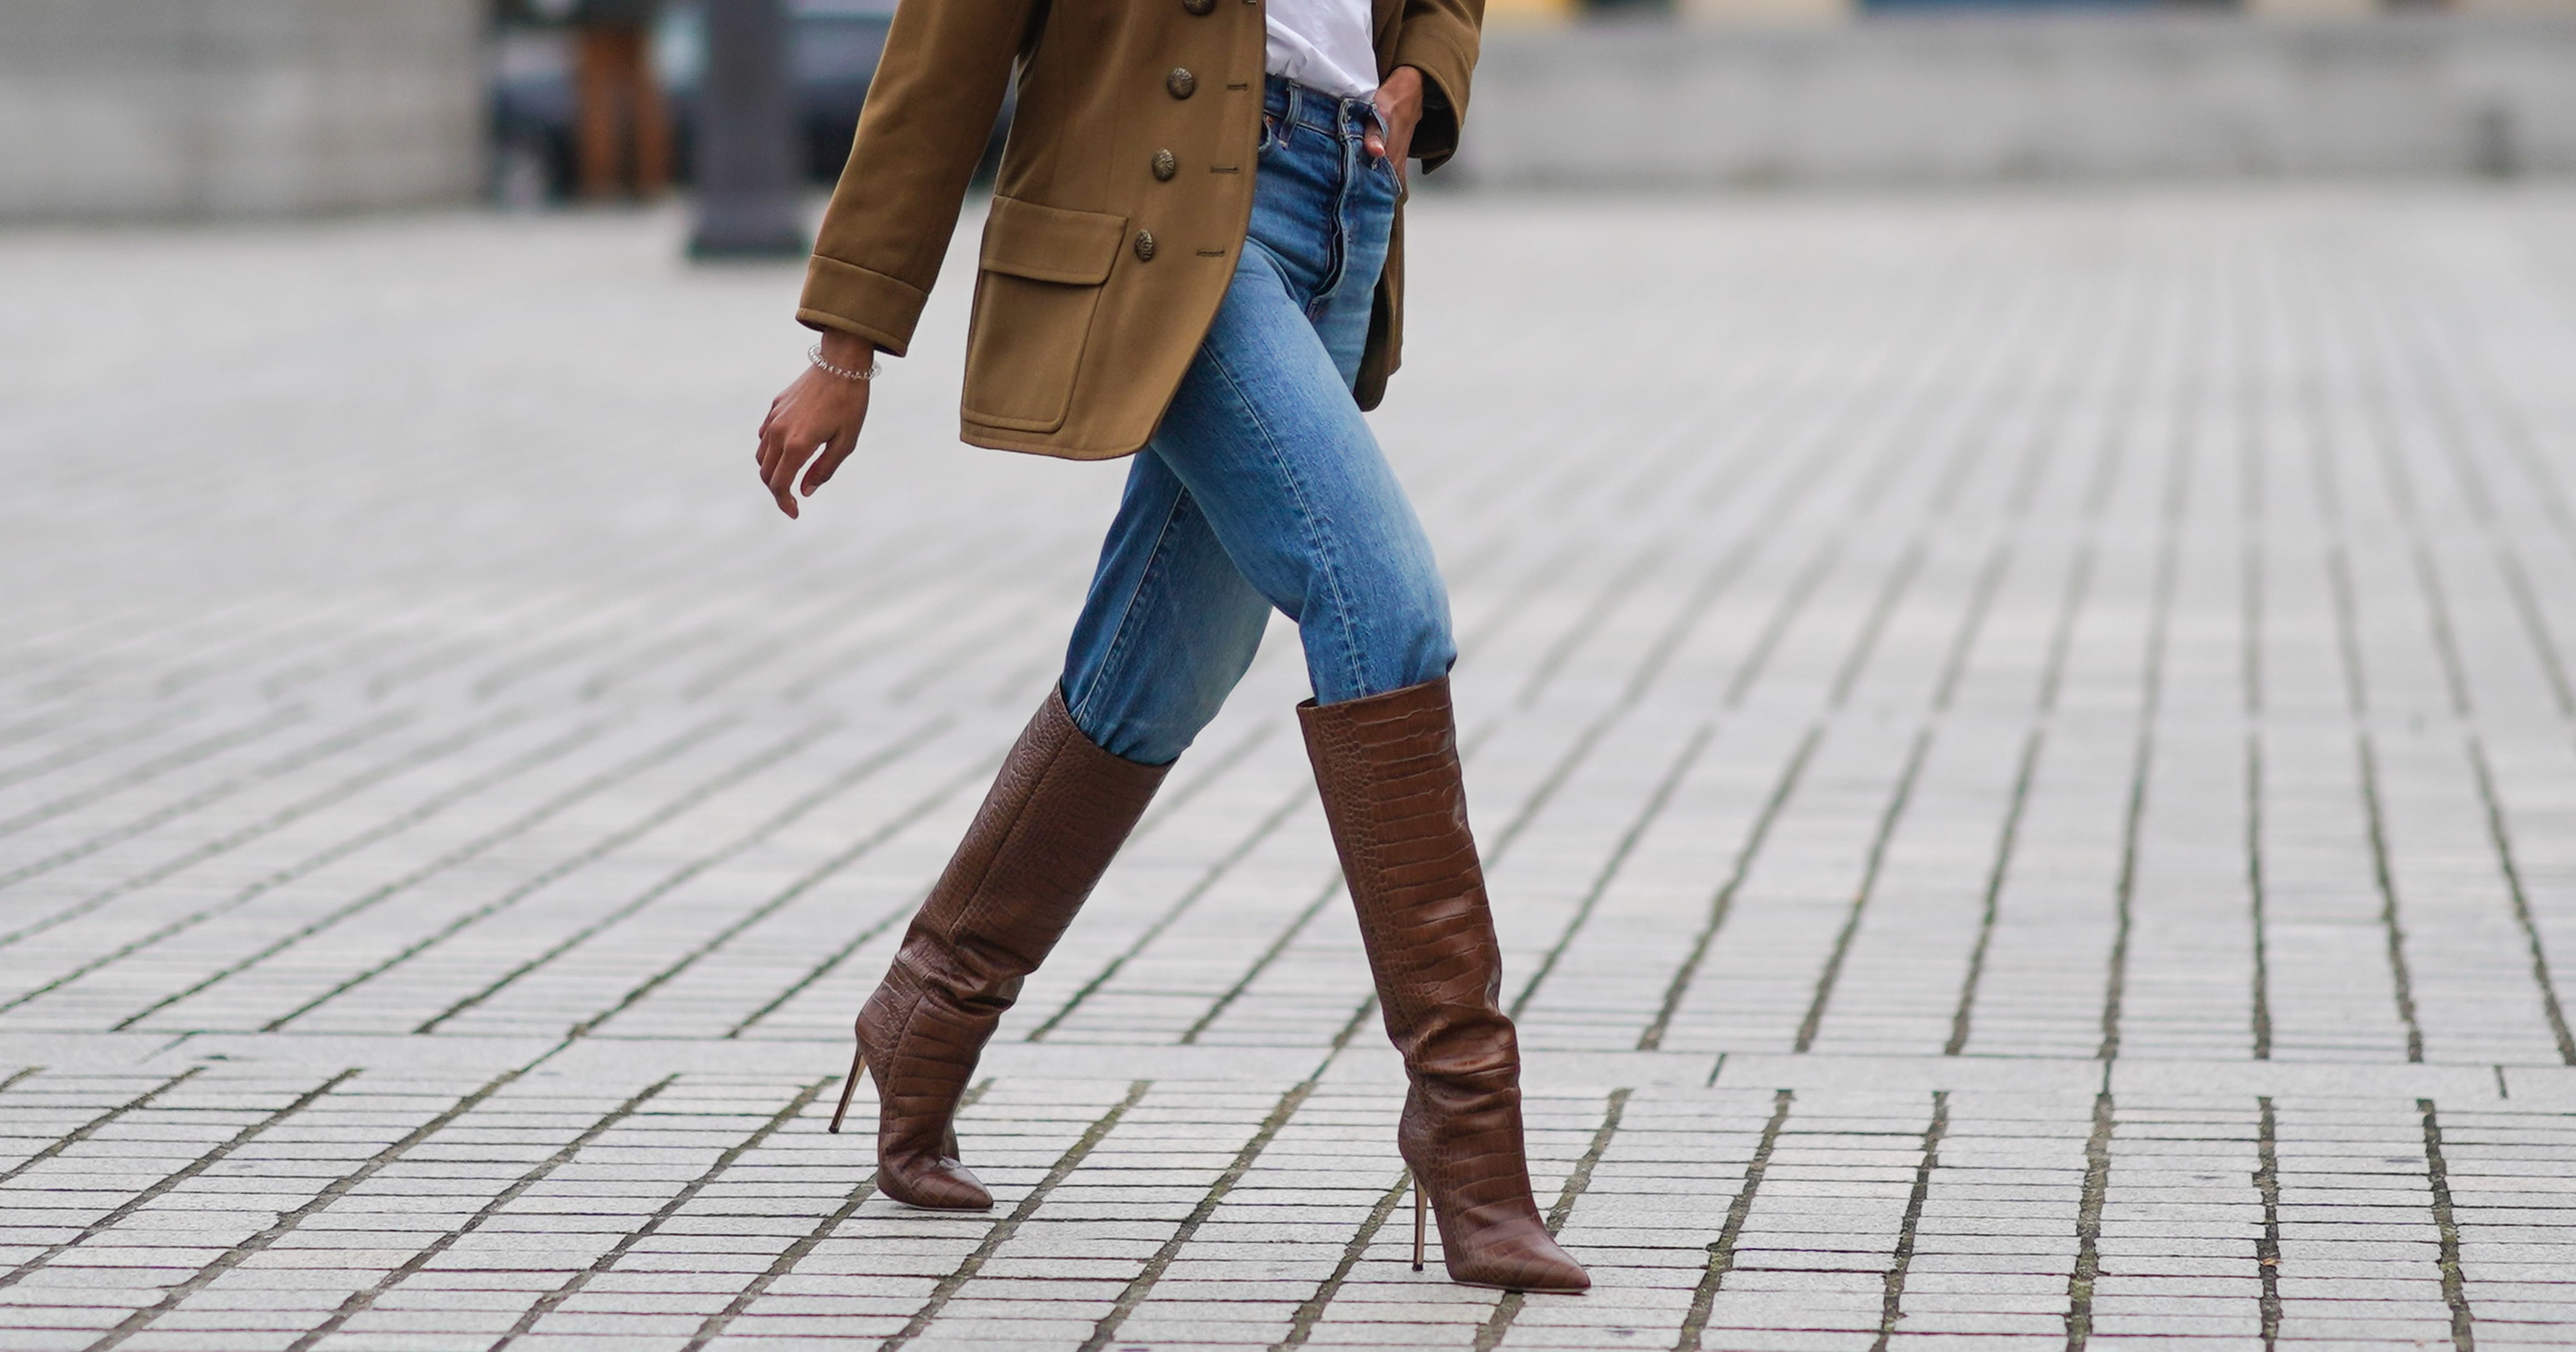 The Best and Most Stylish Boots For Women on